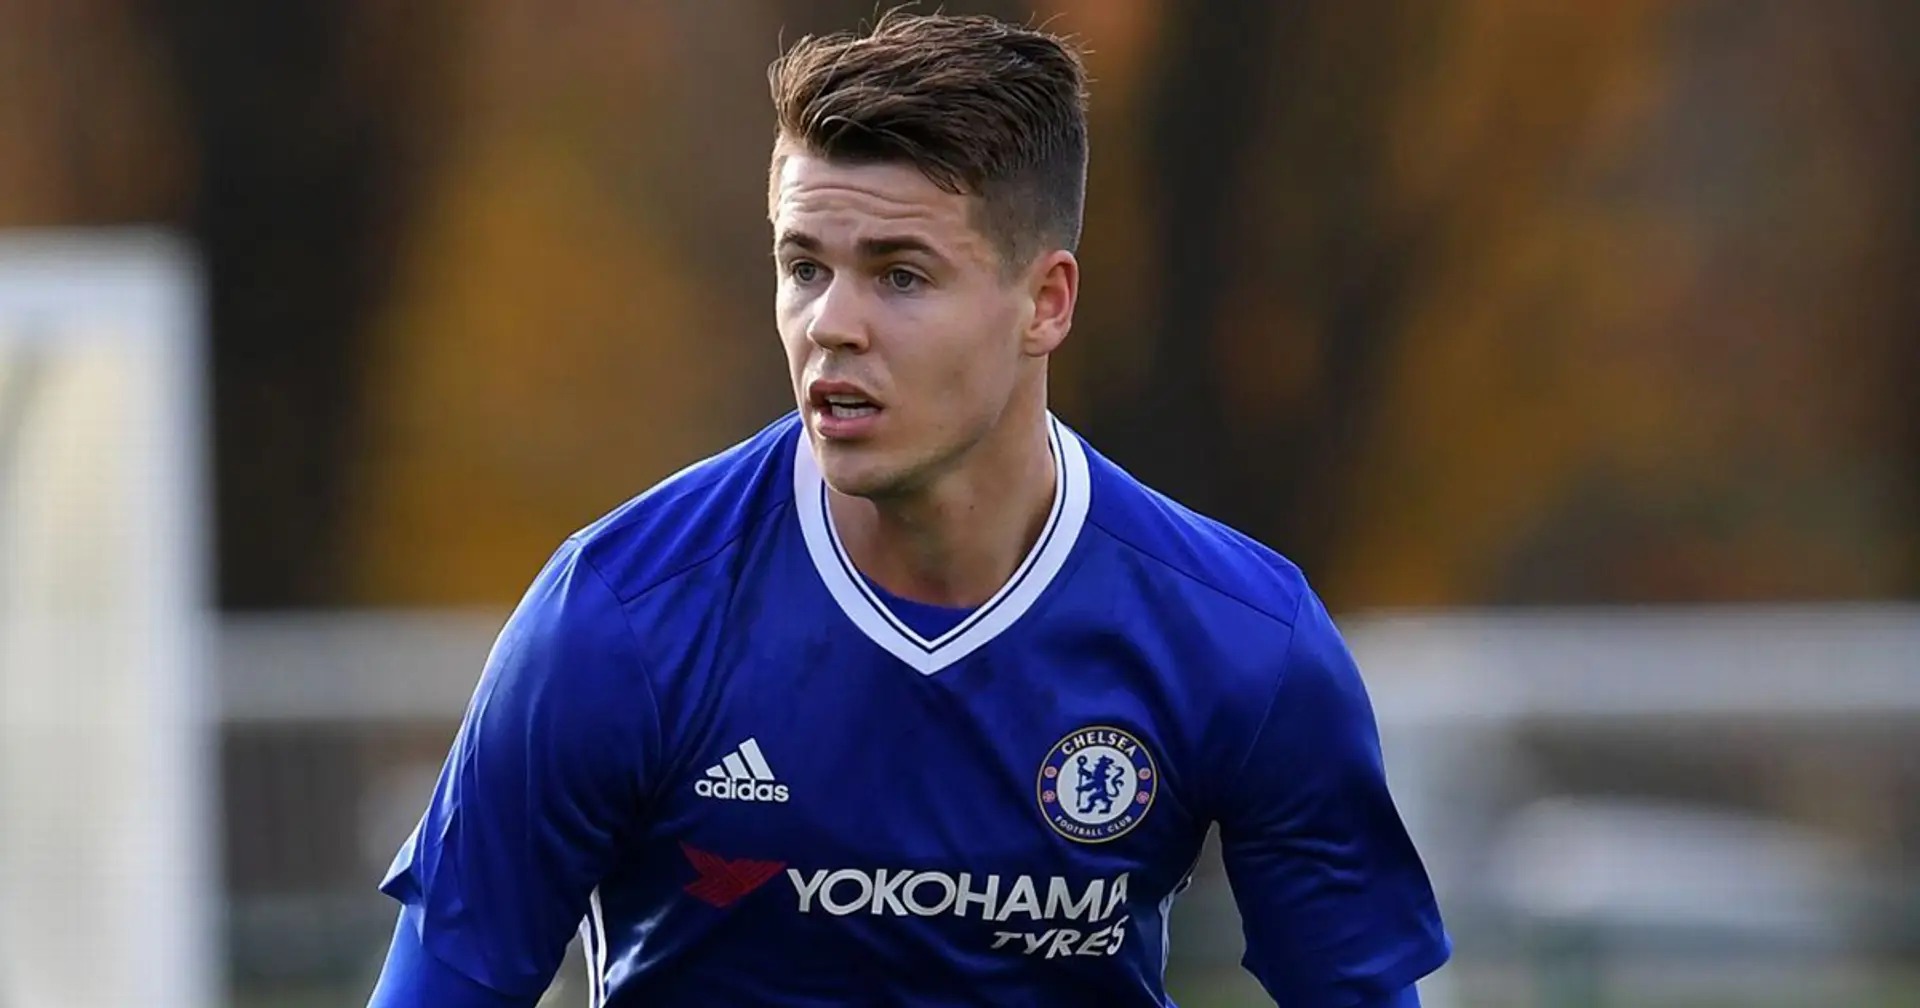 Chelsea's forgotten man Van Ginkel back to full fitness after a year on sidelines